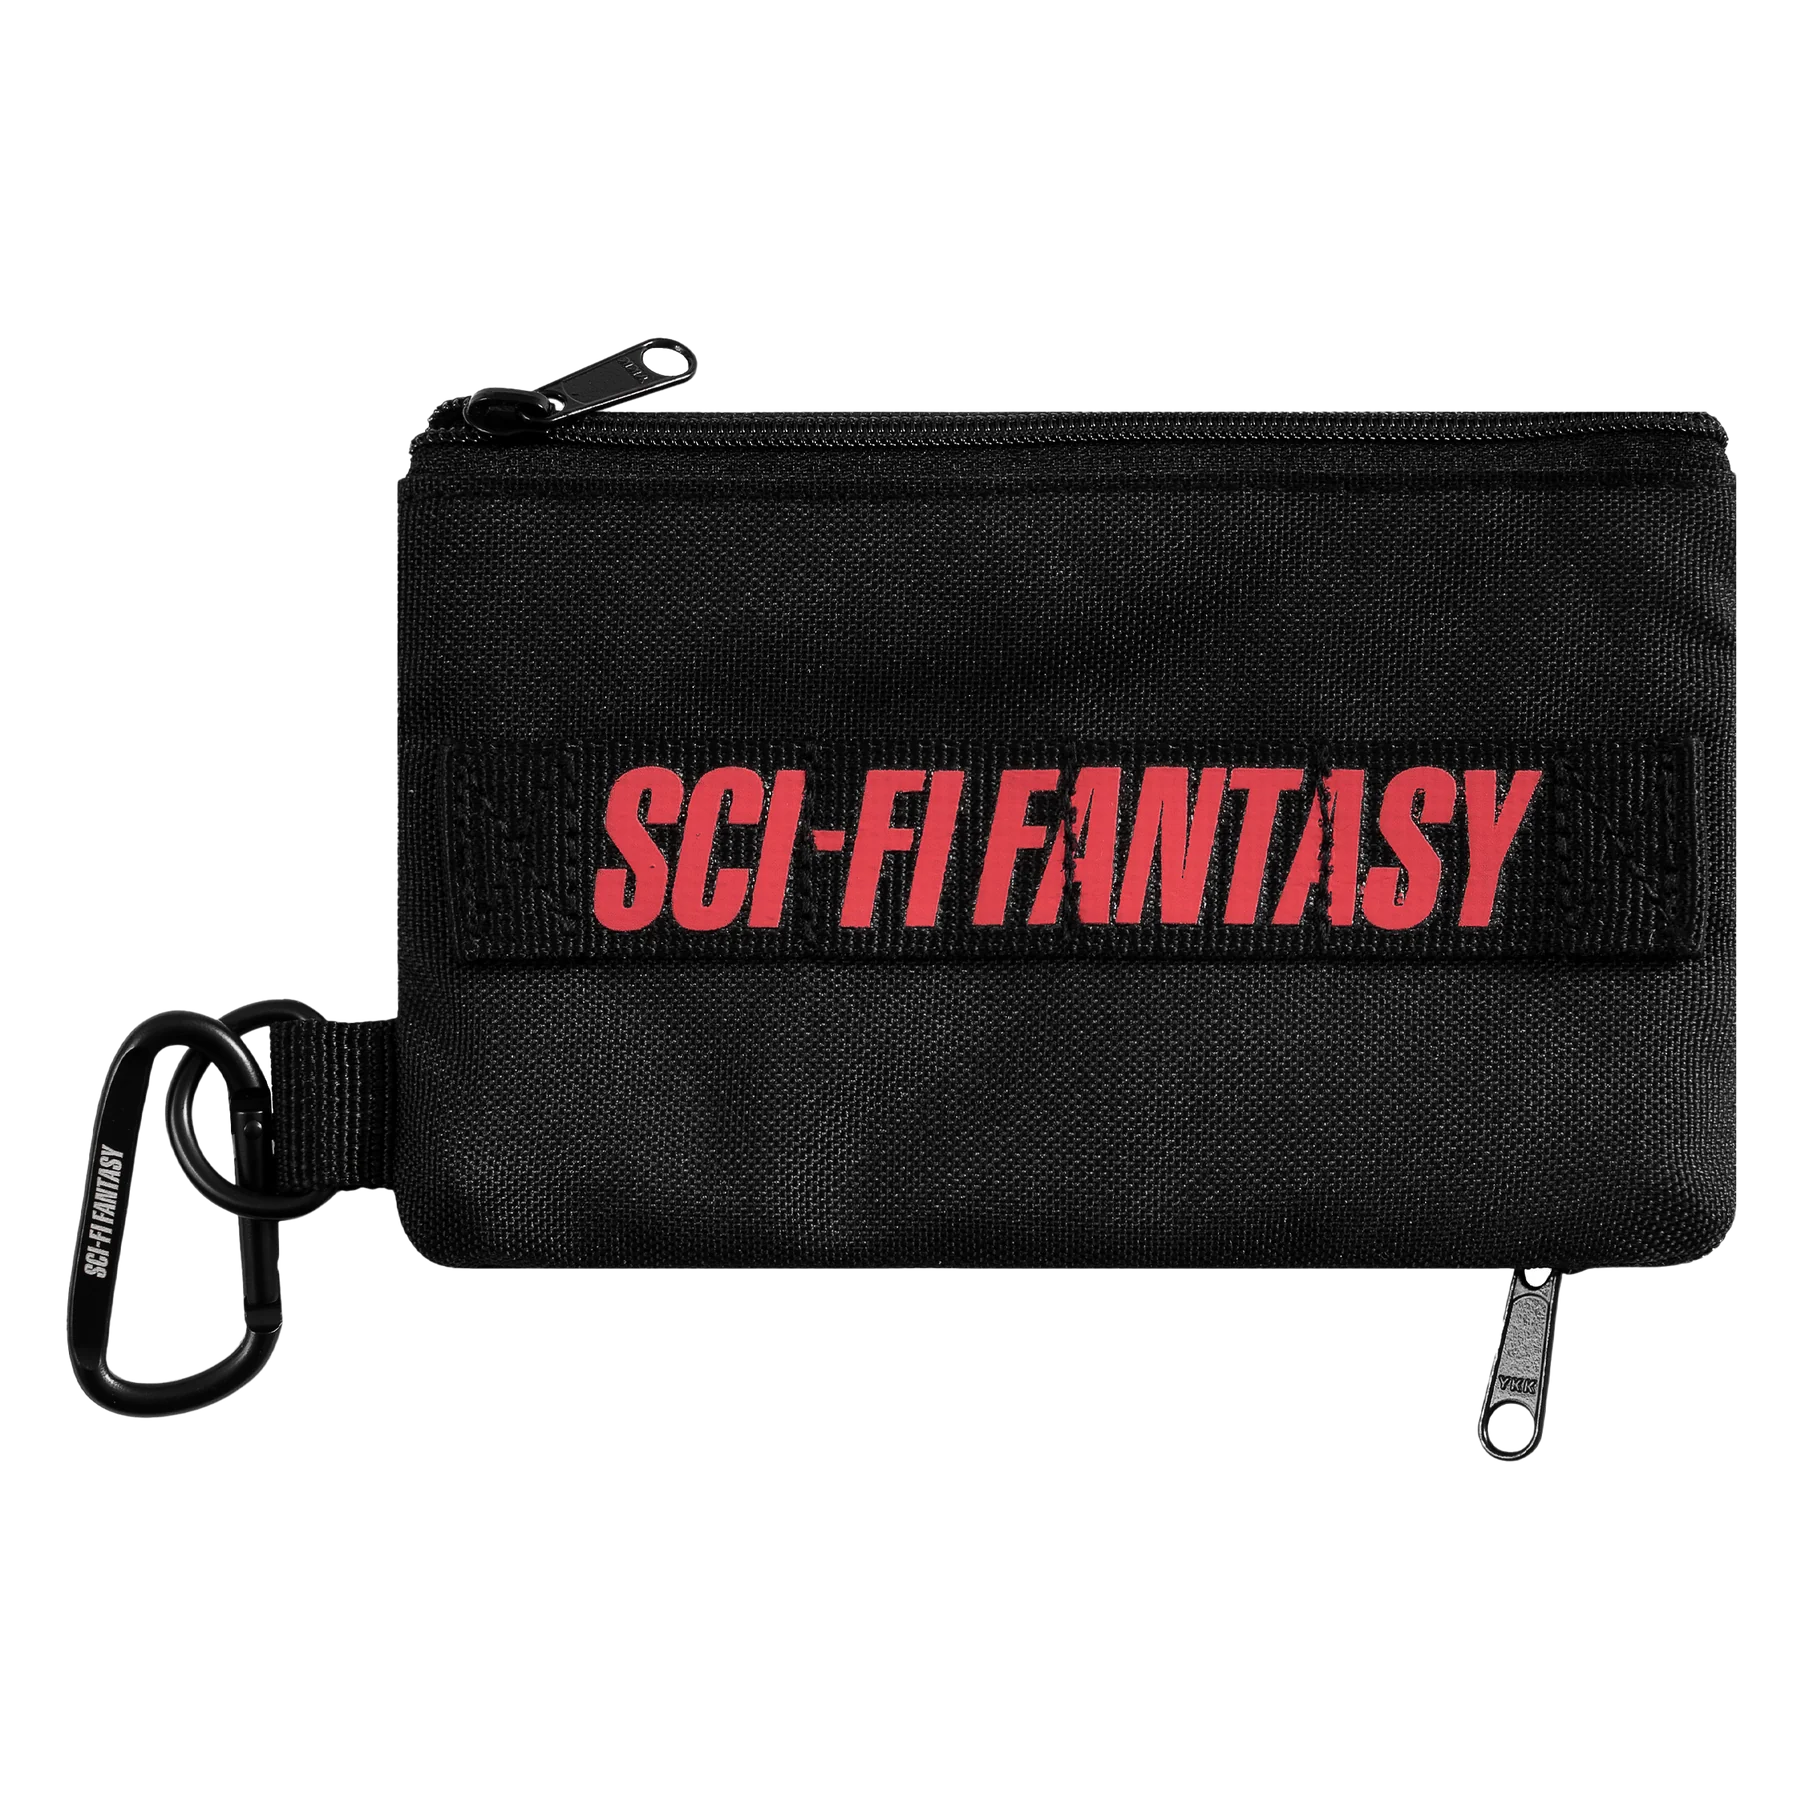 sci-fi fantasy carry all pouch black